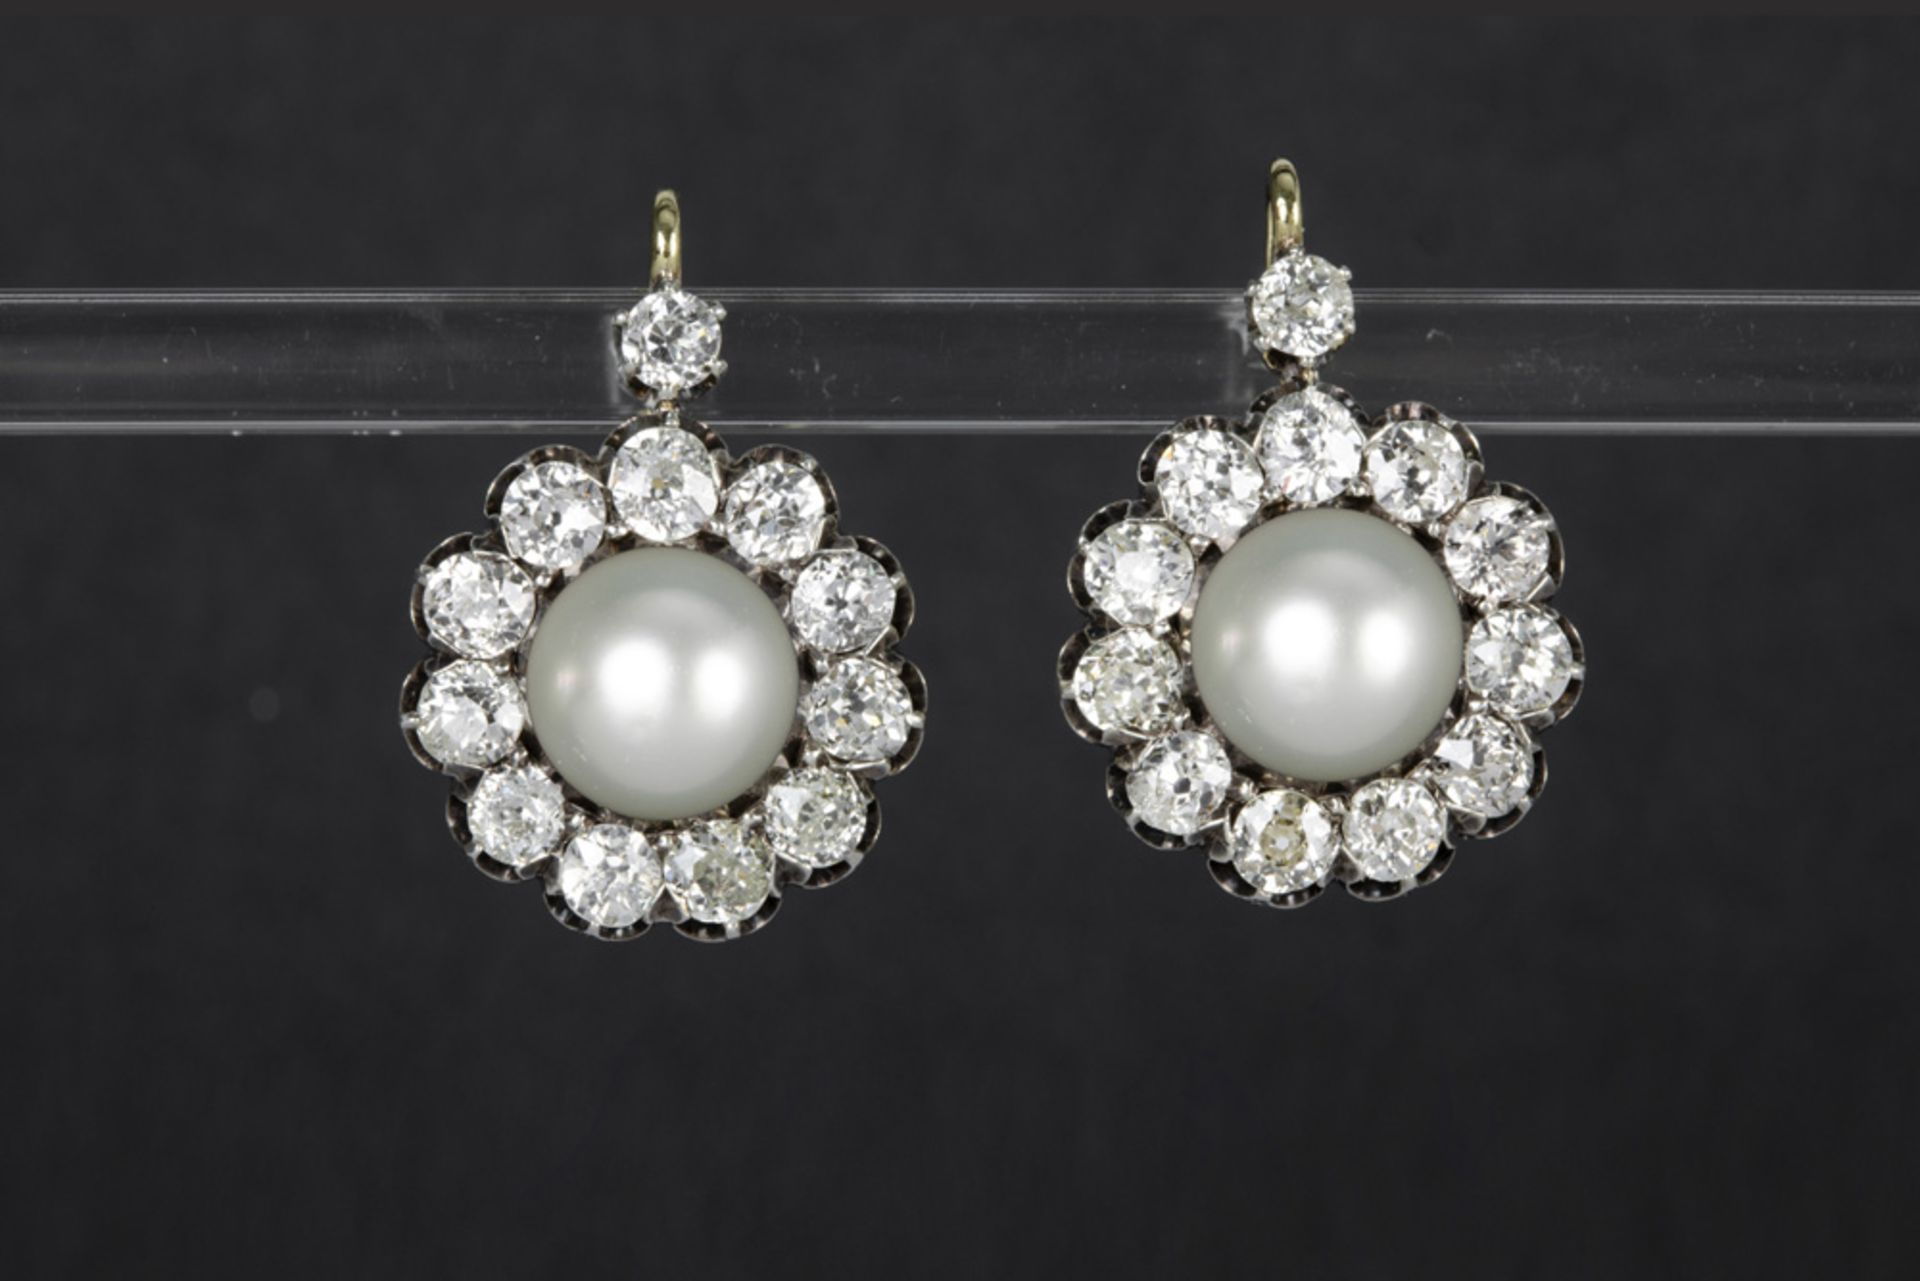 nice pair of 'antique' earrings in silver and yellow gold (18 carat) each with a white pearl